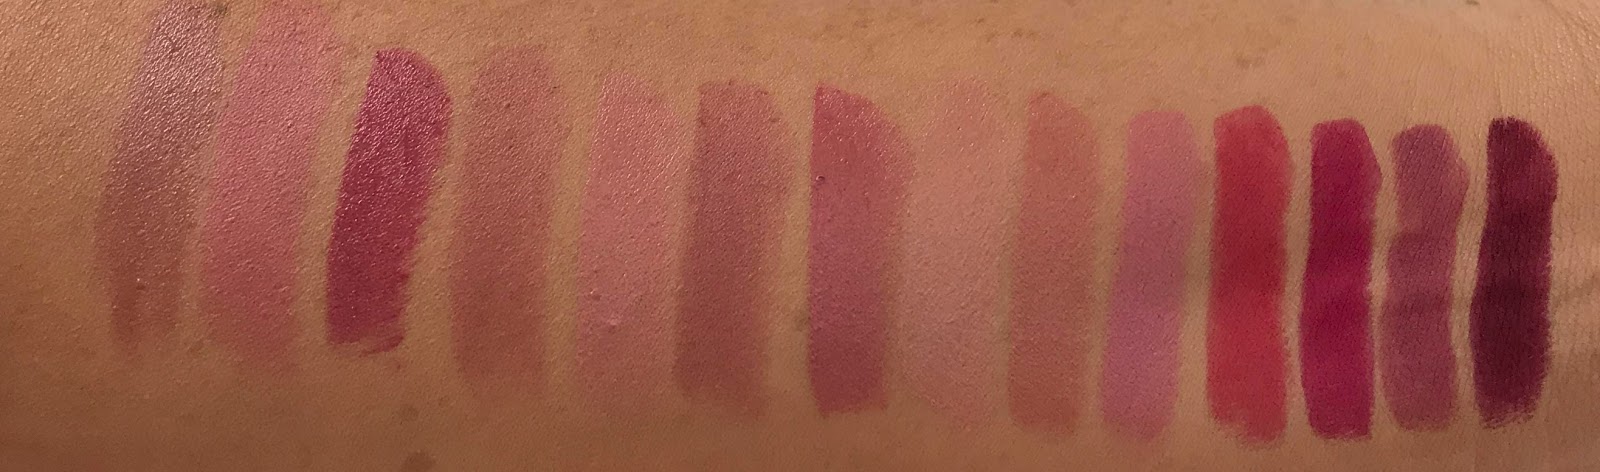 Between The Sheets, Bitch Perfect, Charlotte Tilbury, Confession, English Beauty, Kim K.W., Kiss Chase, Liv It Up, Lost Cherry, Opium Noir, Pillow Talk, Secret Salma, The Duchess, The Queen, Valentine, swatches